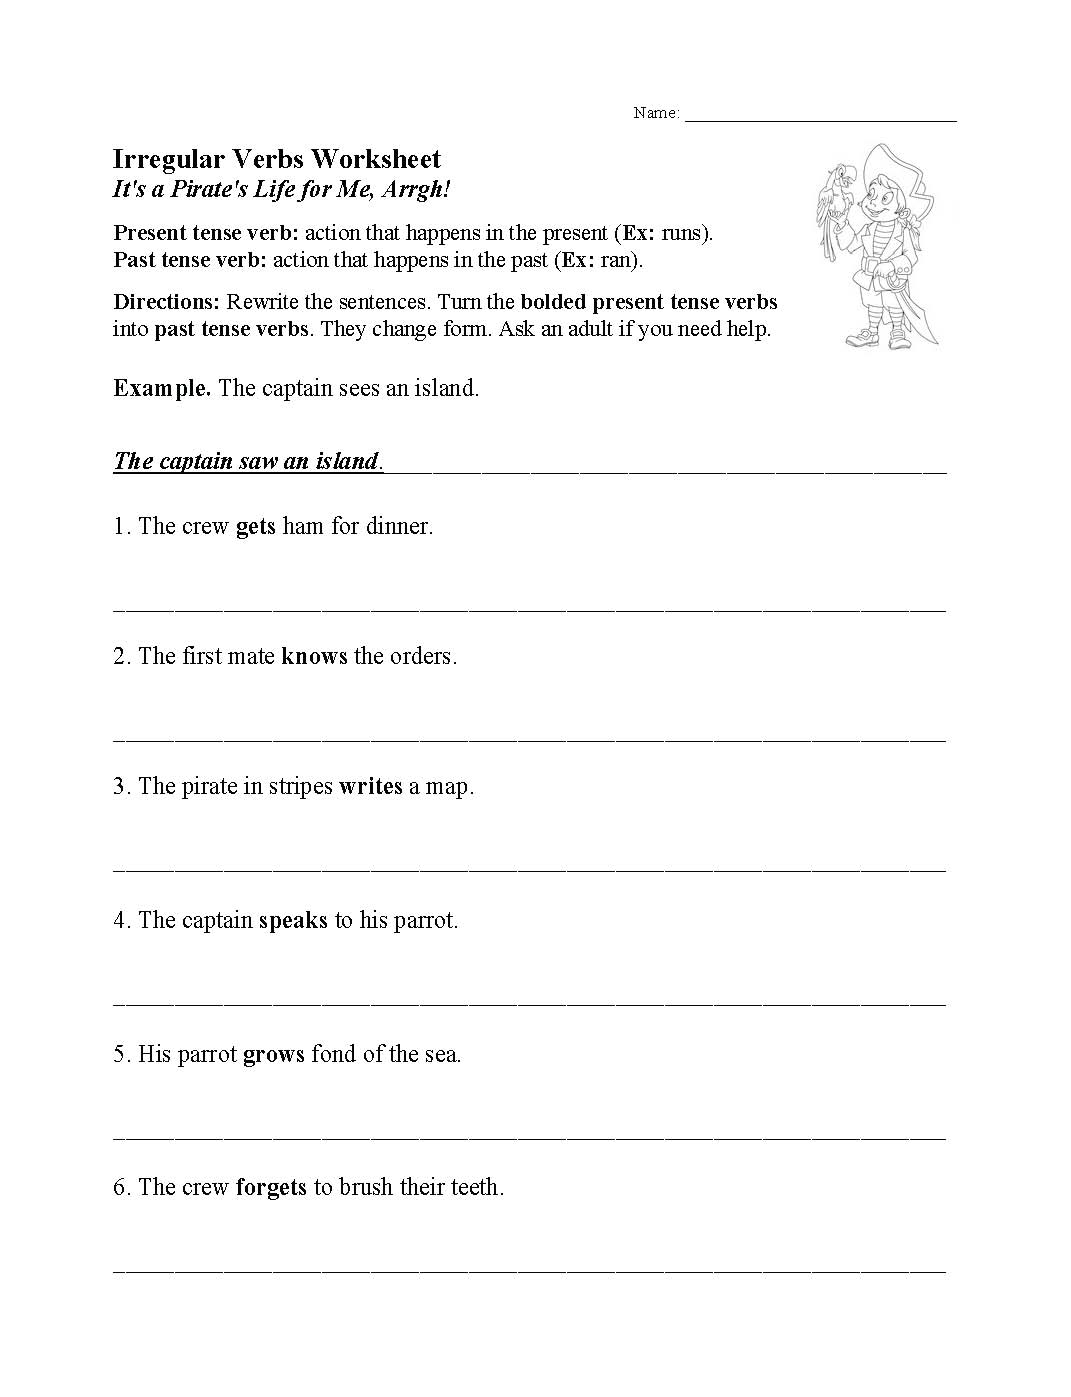 This is a preview image of our Irregular Verbs Worksheet. Click on it to enlarge this image and view the source file.